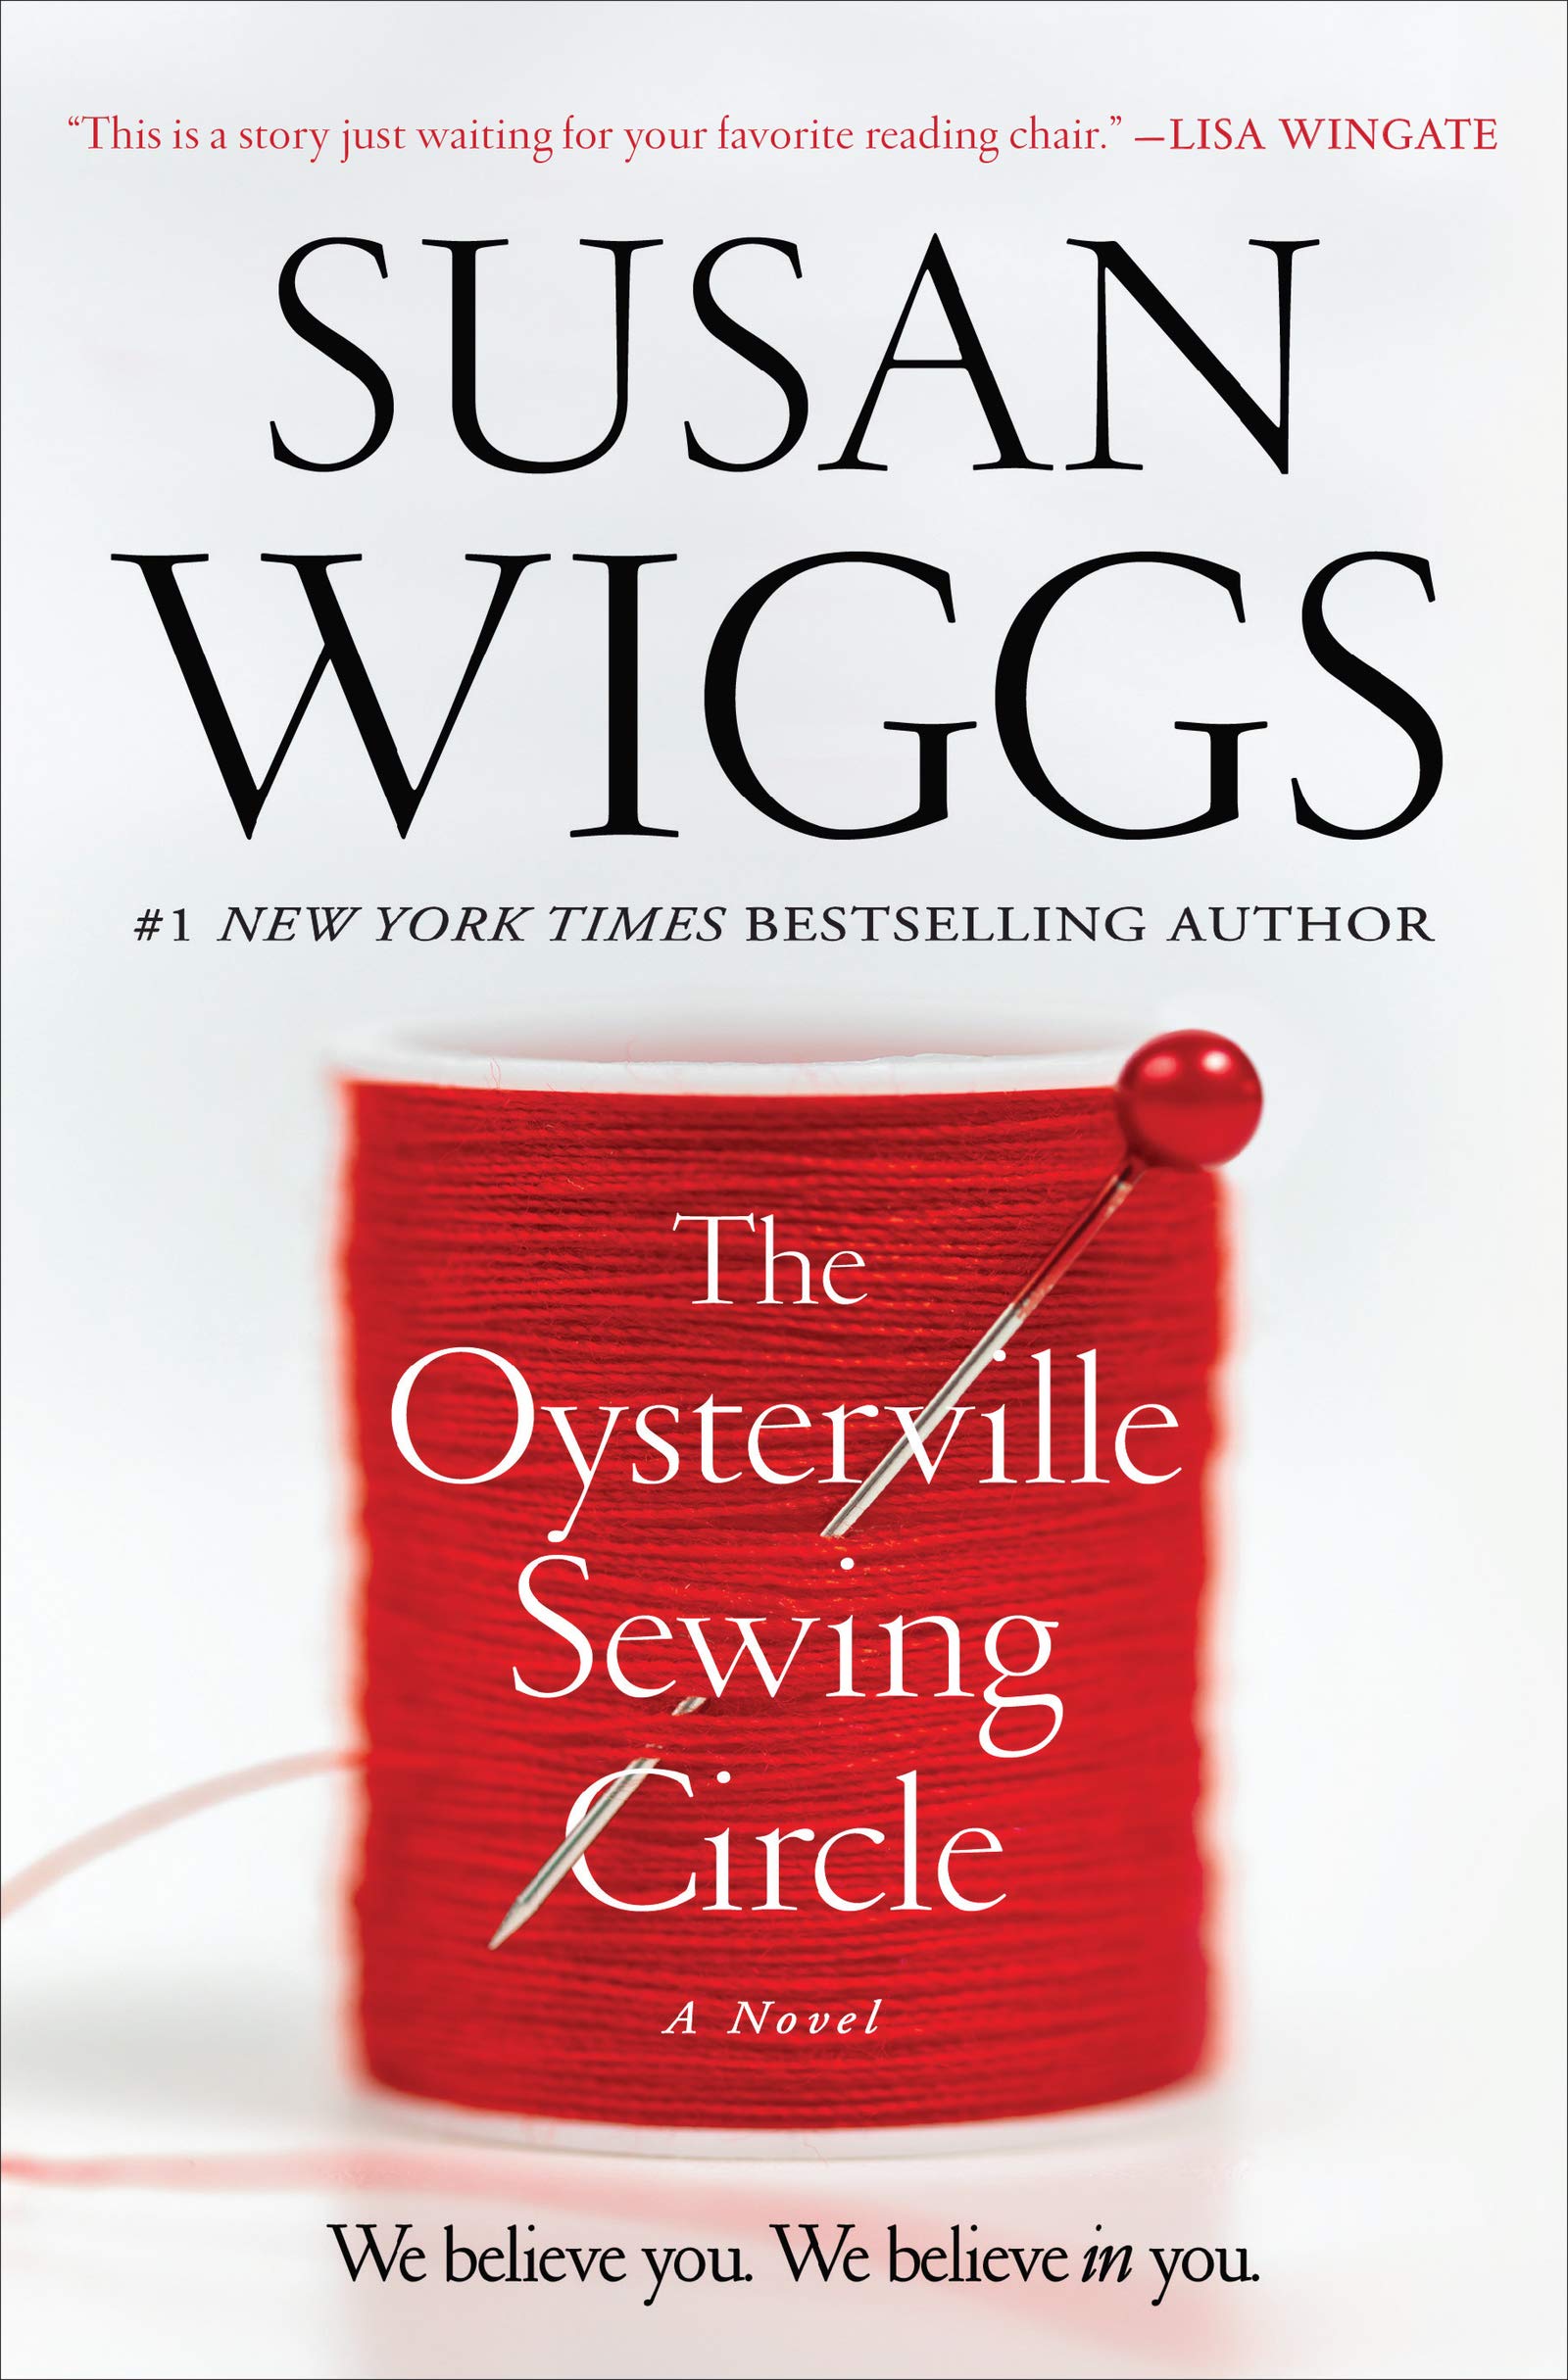 Book Cover The Oysterville Sewing Circle: A Novel